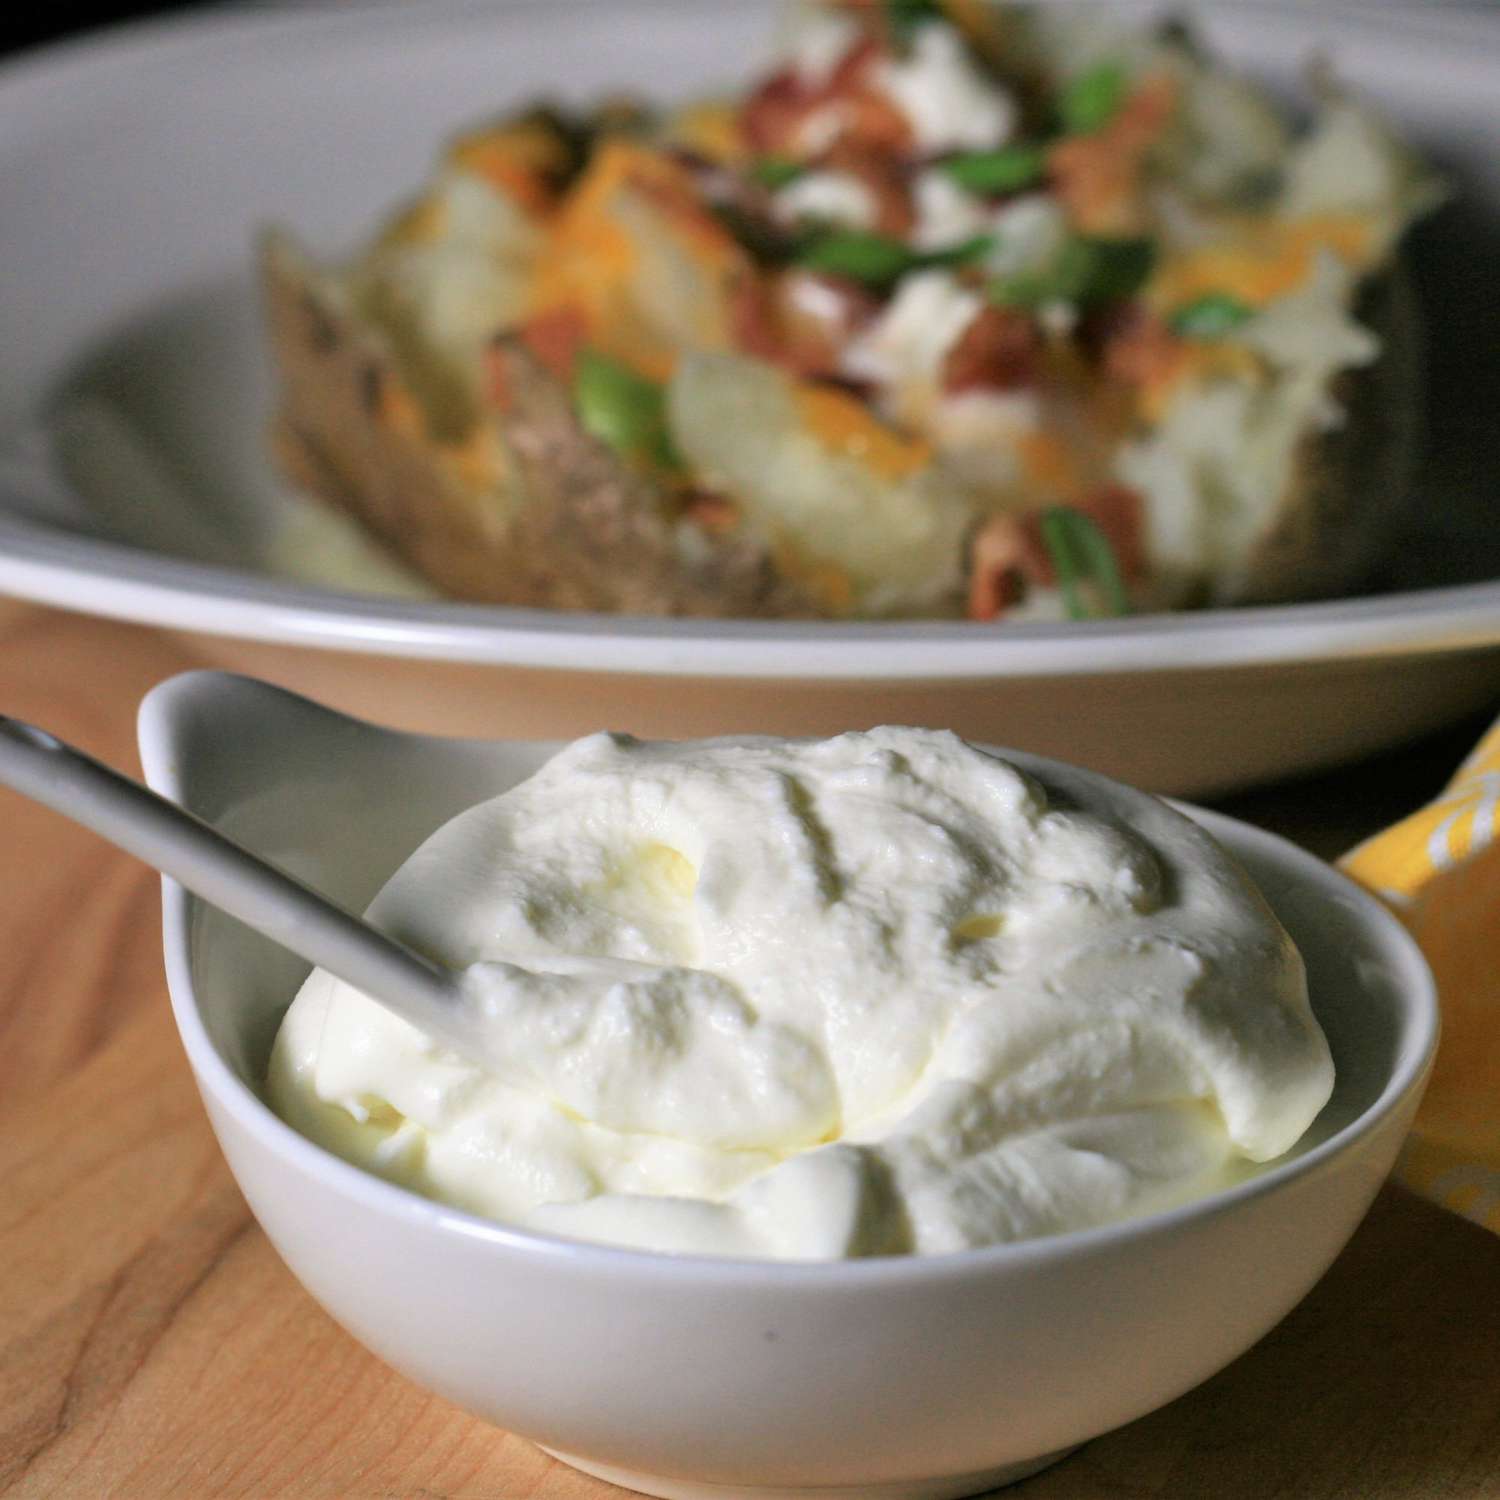 a spoon and serving bowl of thick-looking sour cream in the foreground with a loaded baked potato in the background